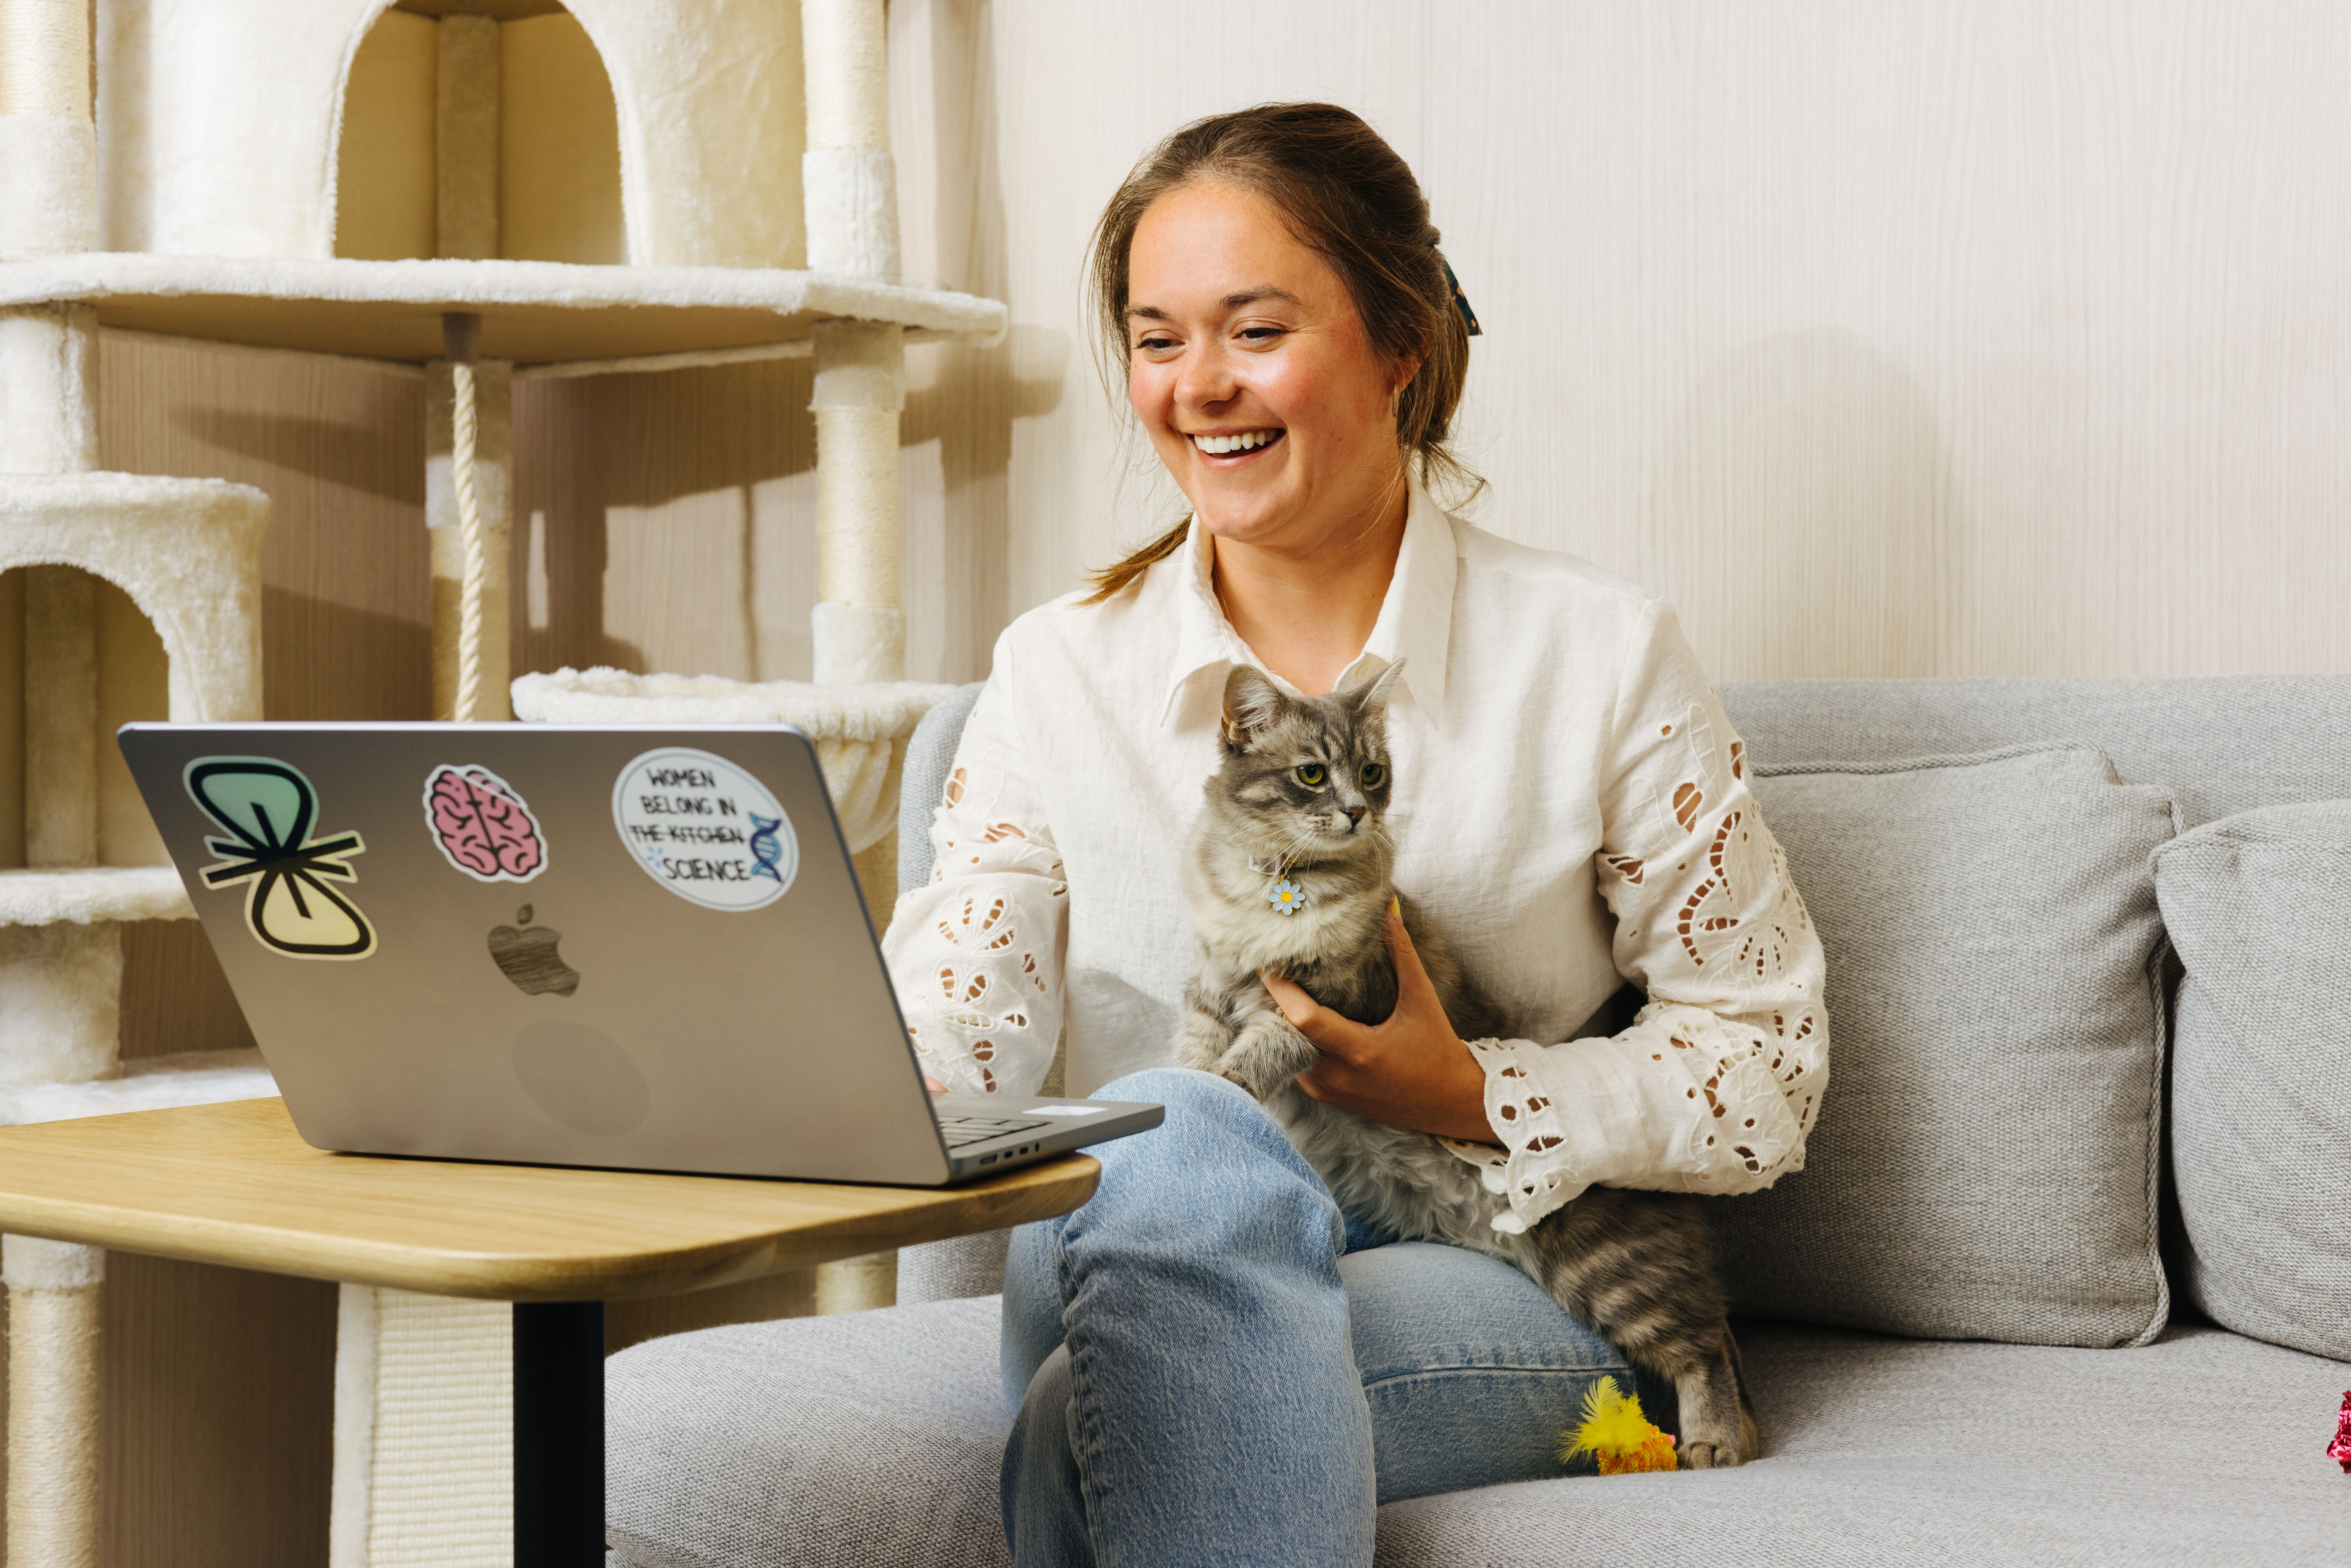 A neuroscientist works on her laptop while holding her cat in her lap. The cat's name is Marie.